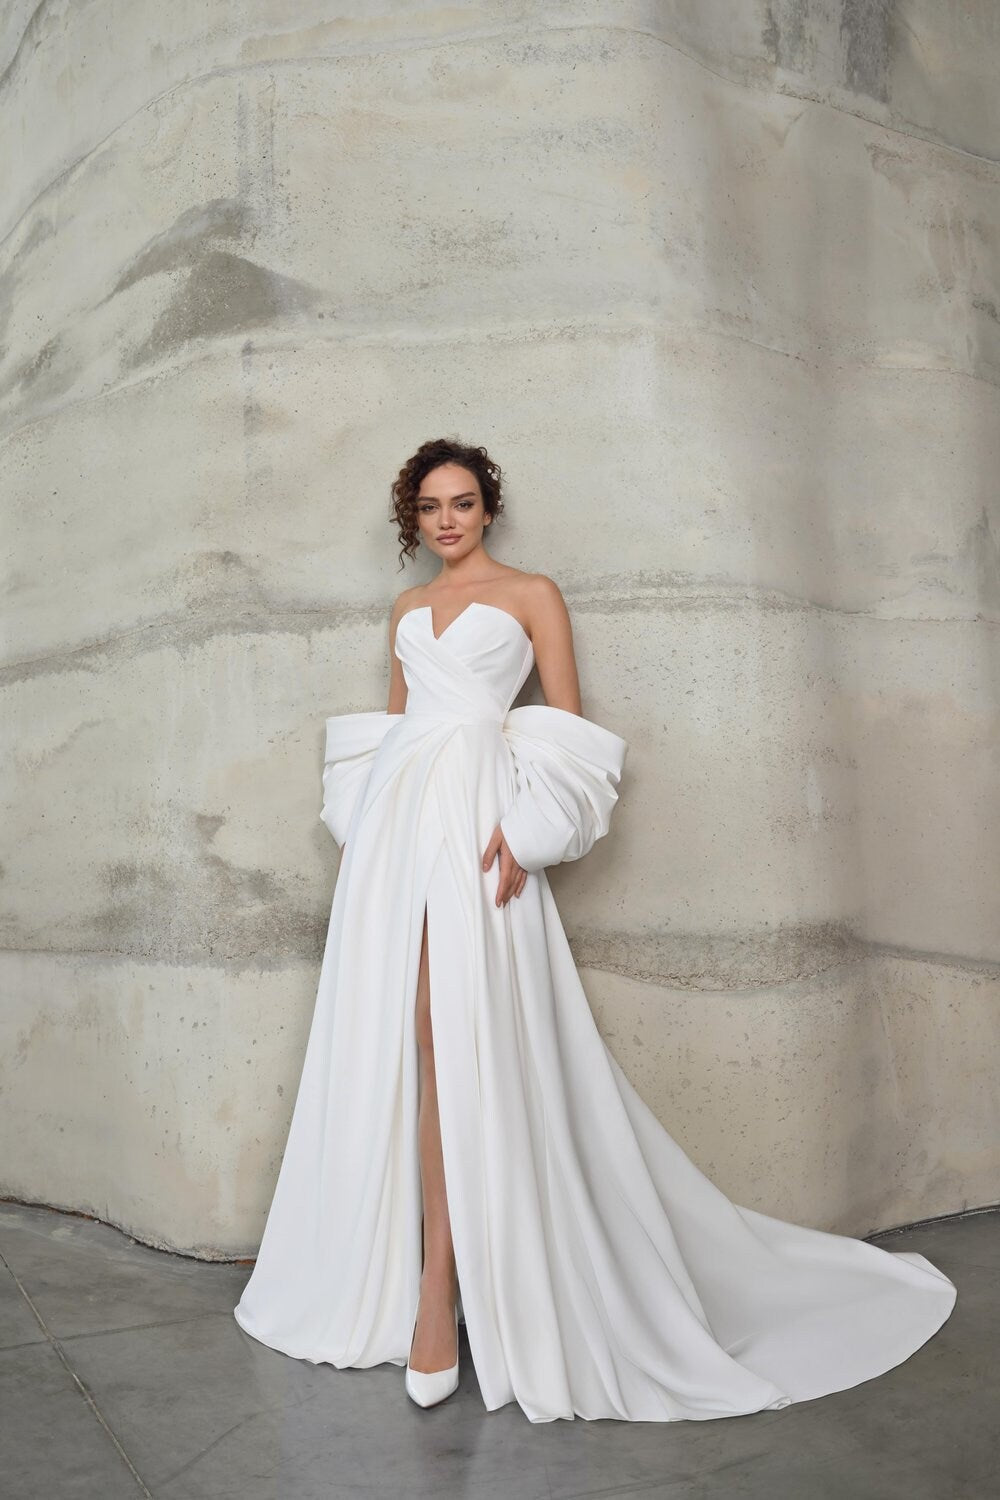 Minimalist Simple Off the Shoulder Back Bow Wedding Dress Bridal Gown Aline with Train Classic Design Side Slit Pleated Waist Strapless